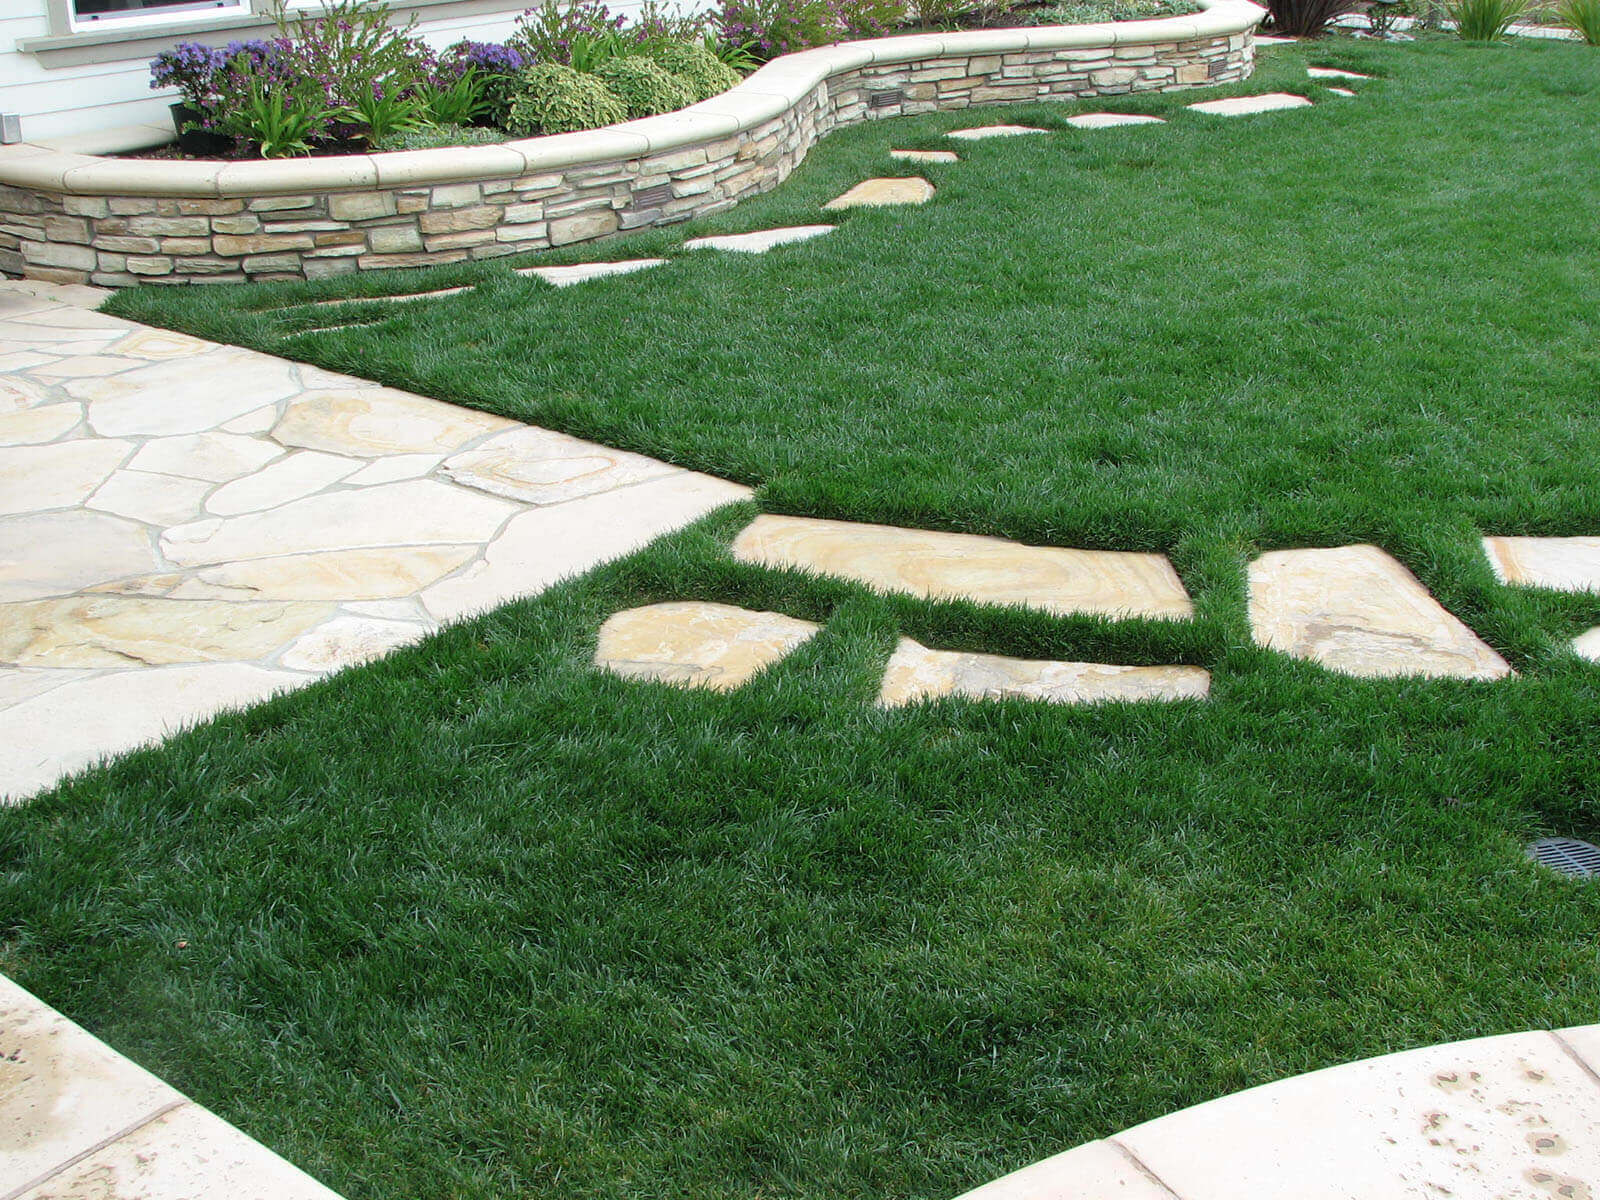 Flat stone laid in medium height lawn, going from stone patio to other sections